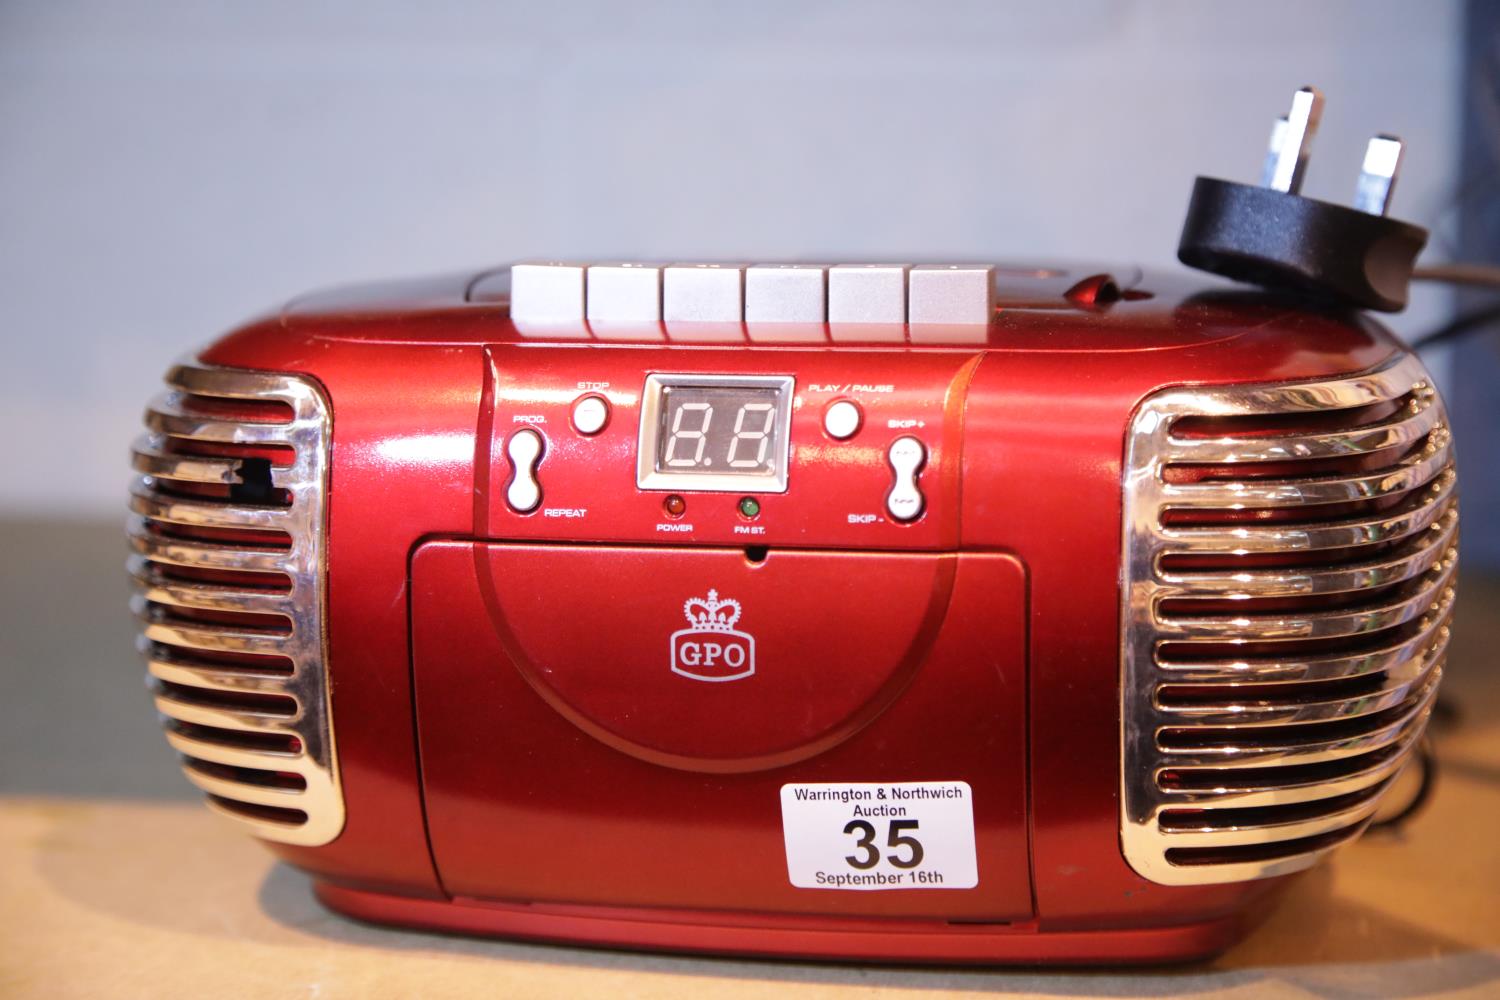 Red GPO PCD299 a 3-in-1 FM/AM Radio, CD and Cassette player with power cable. Not available for in-